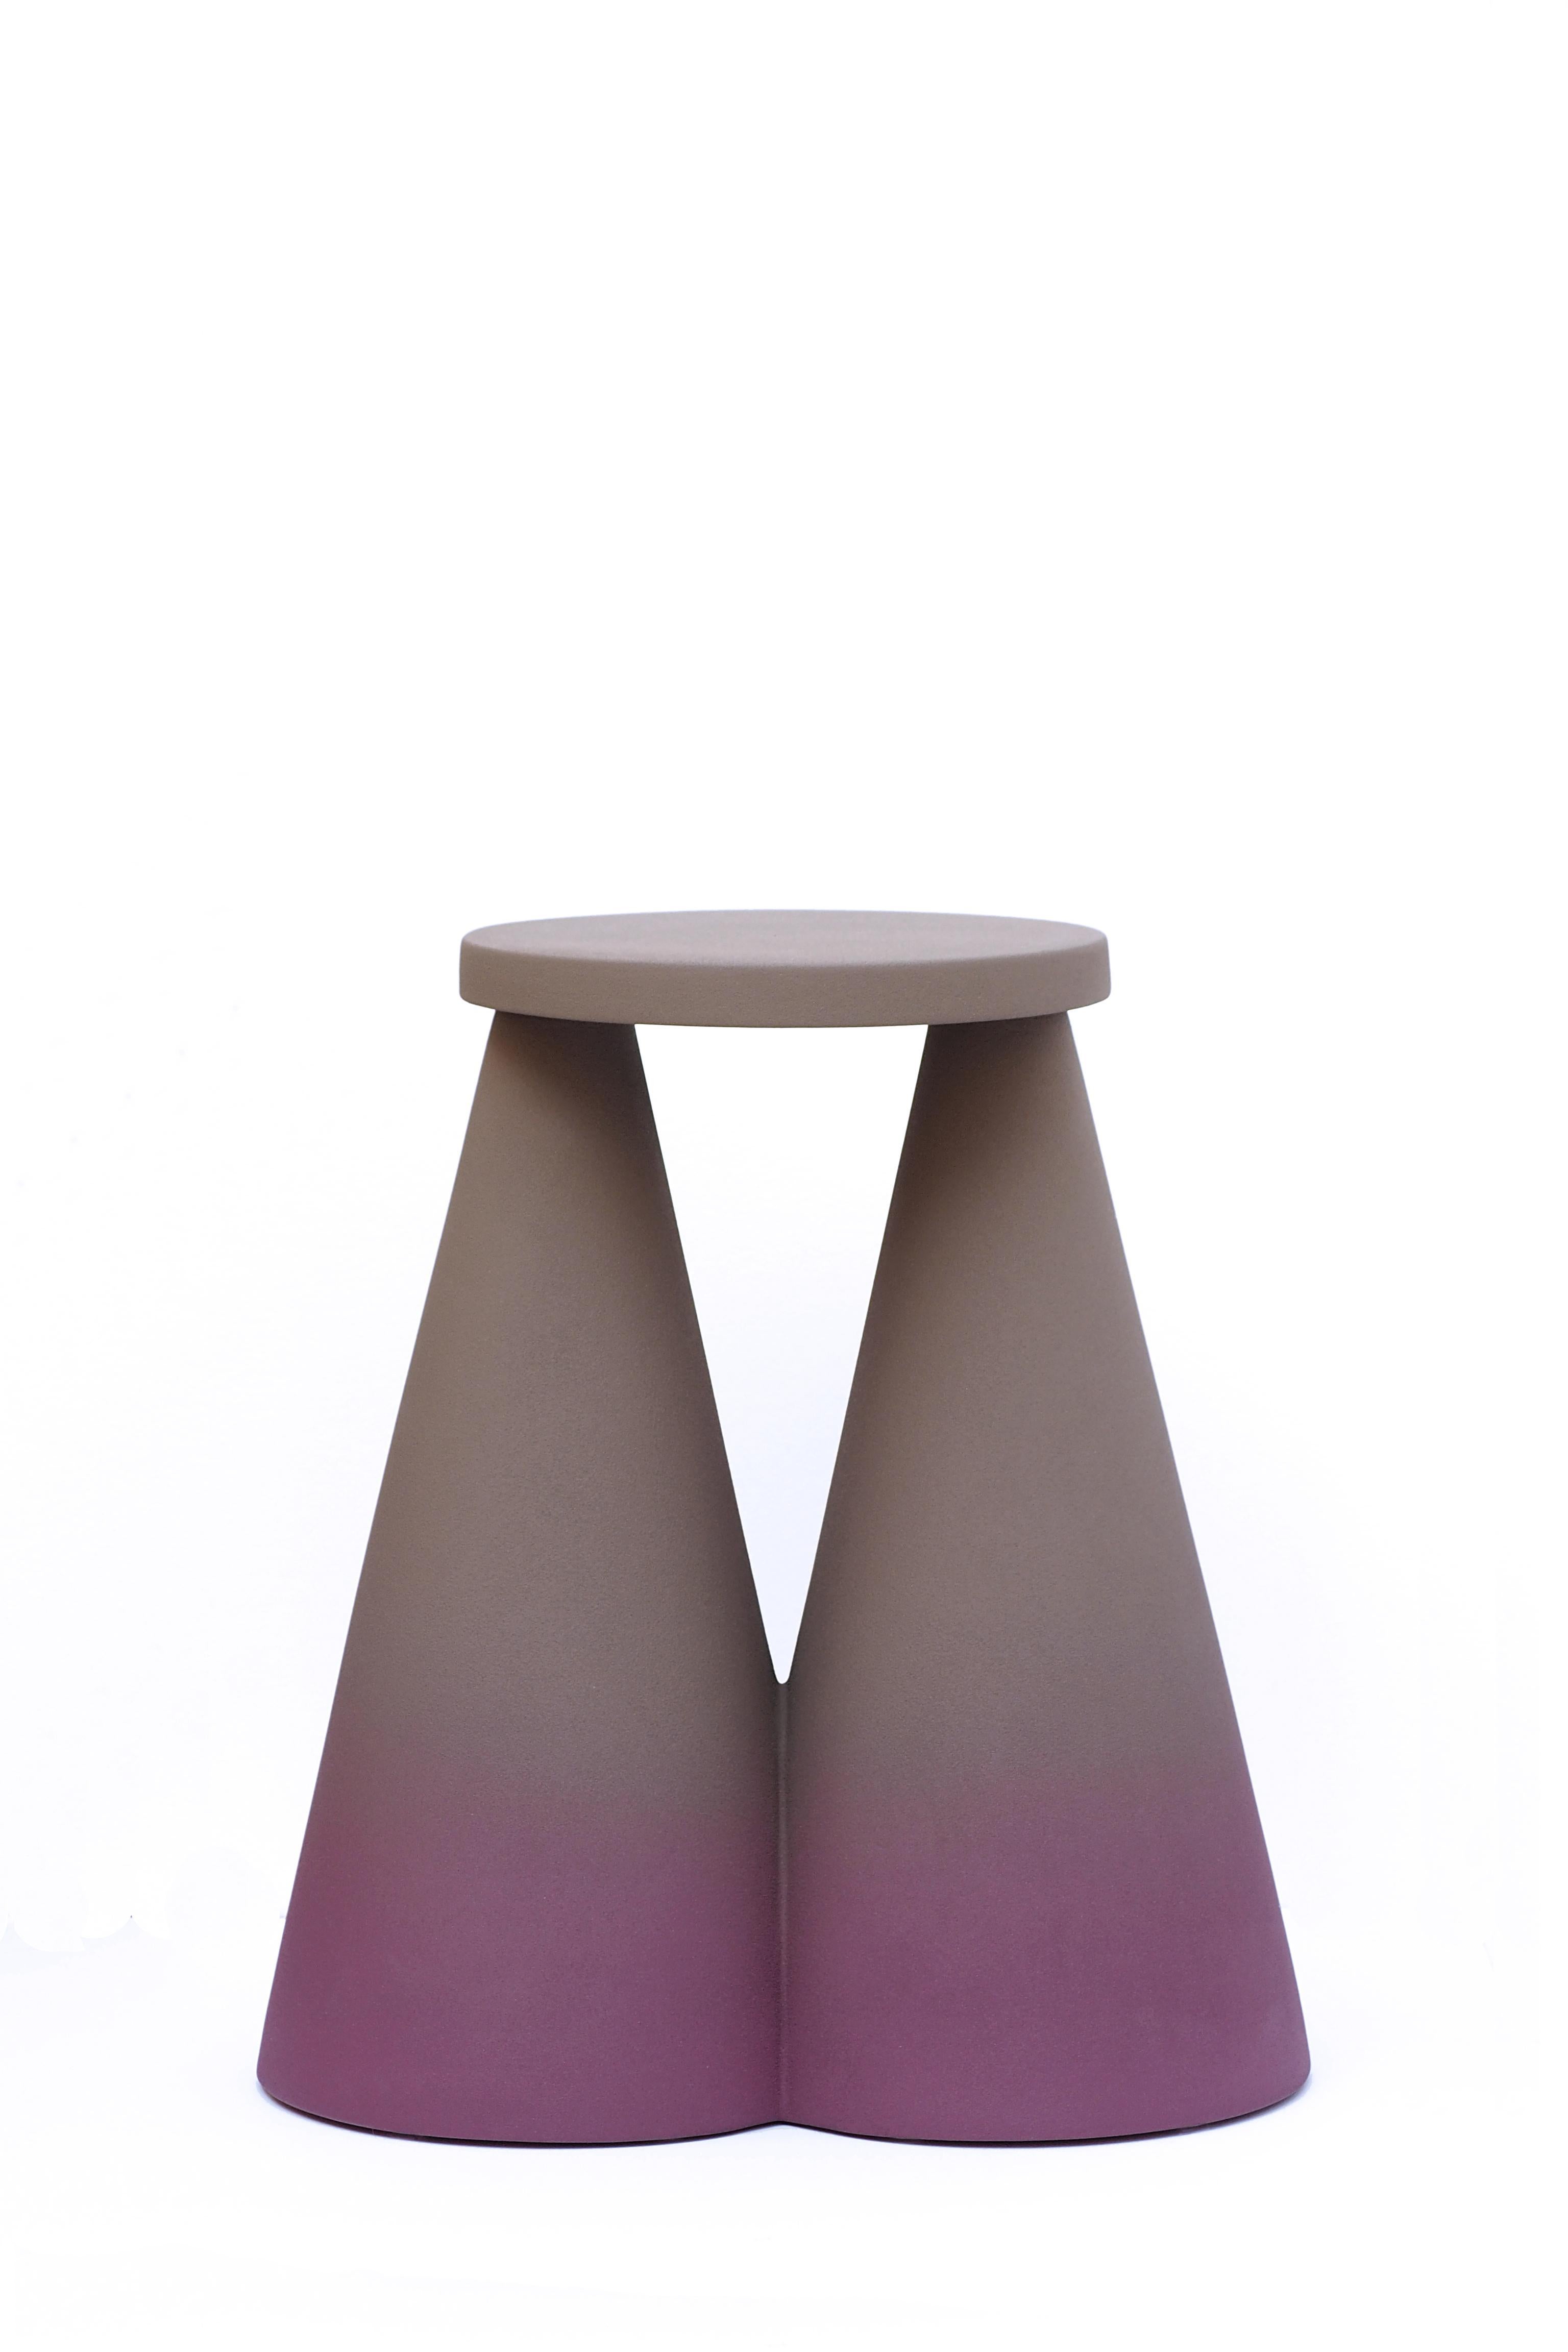 Purple Isola side table by Cara Davide
Dimensions: D 25 x W 43 x H 45 cm 
Materials: Ceramic /Rough touch finishing.
Also available in colors: Honey and purple.


Isola side table is completely made in ceramic using a high-temperature furnace,